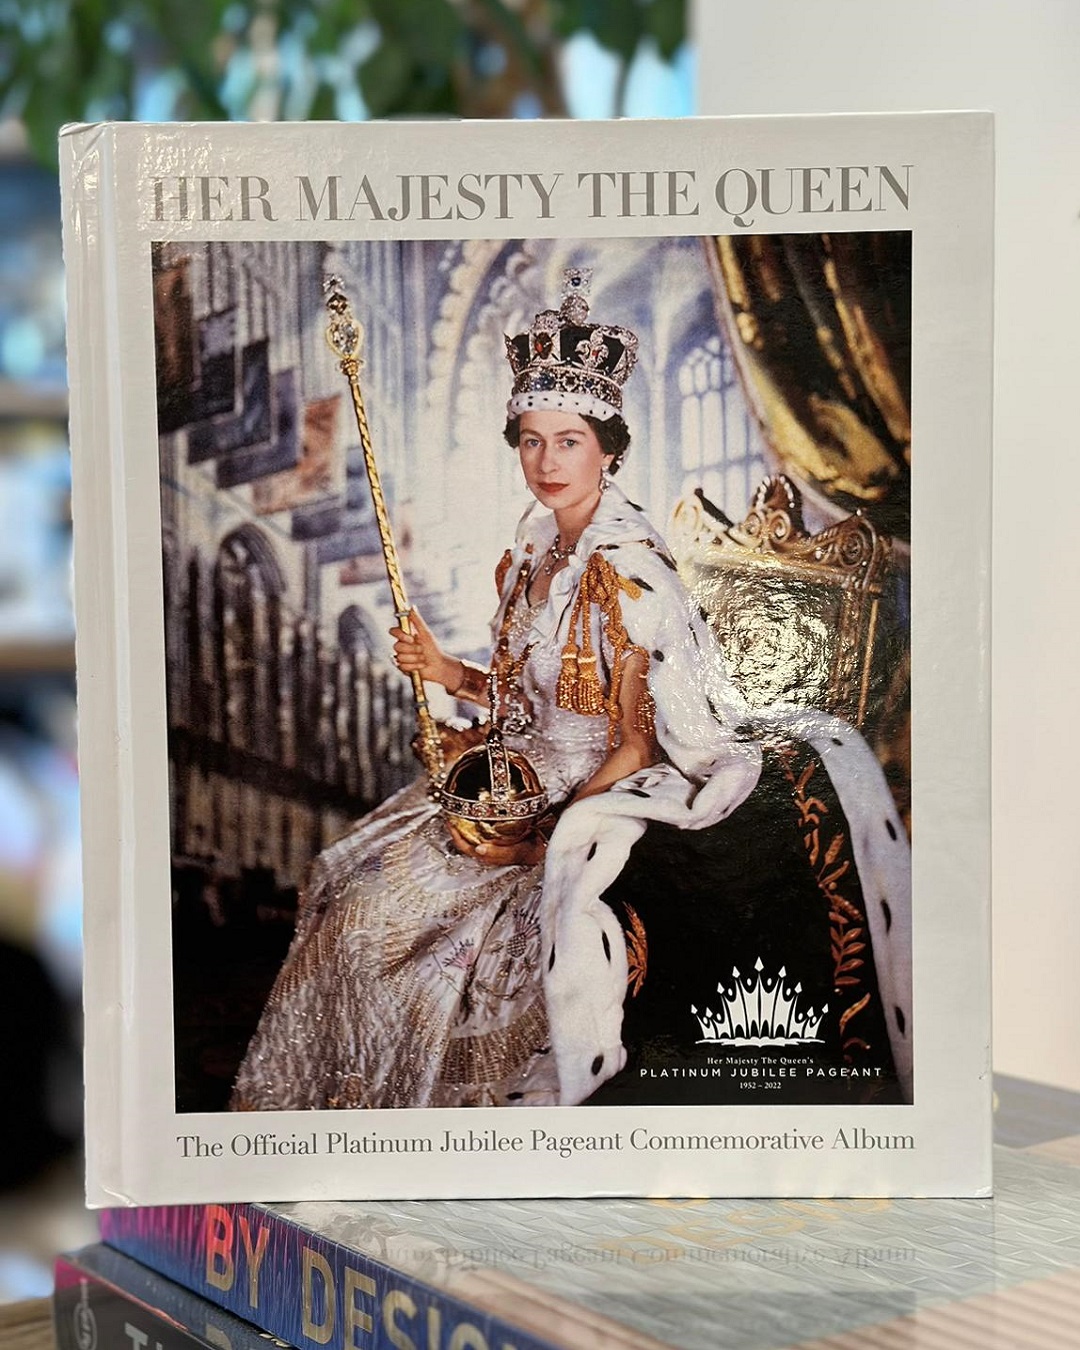 Her majesty the queen book